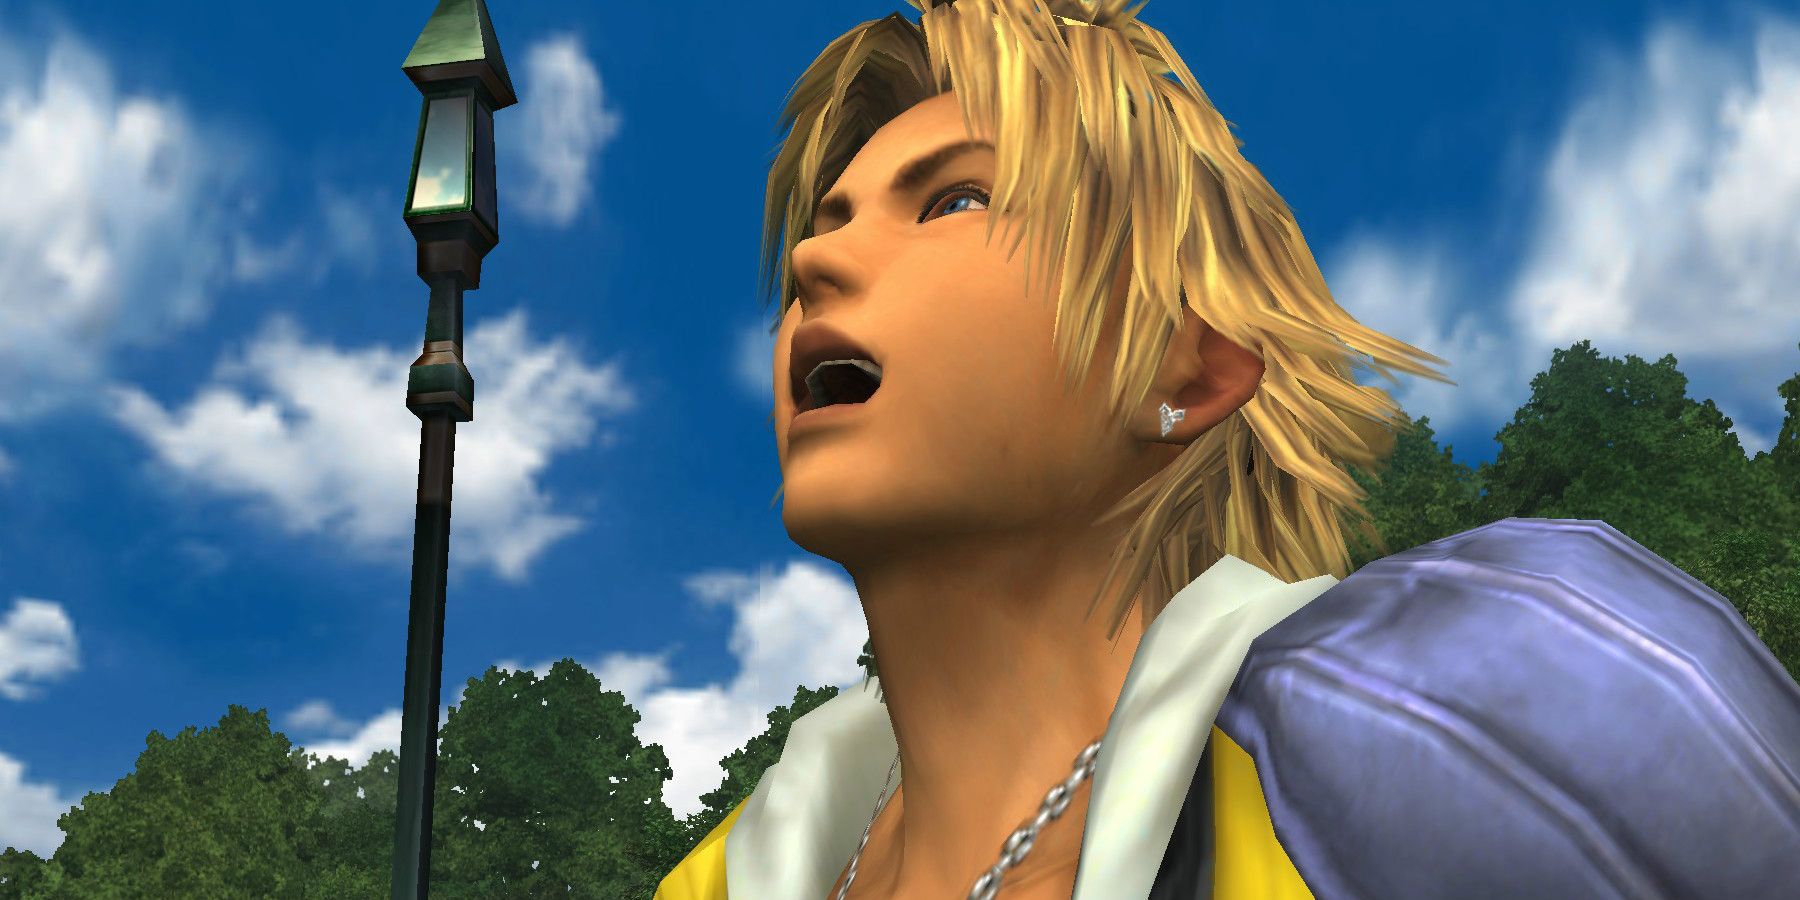 Tidus laughing loudly in Final Fantasy 10.